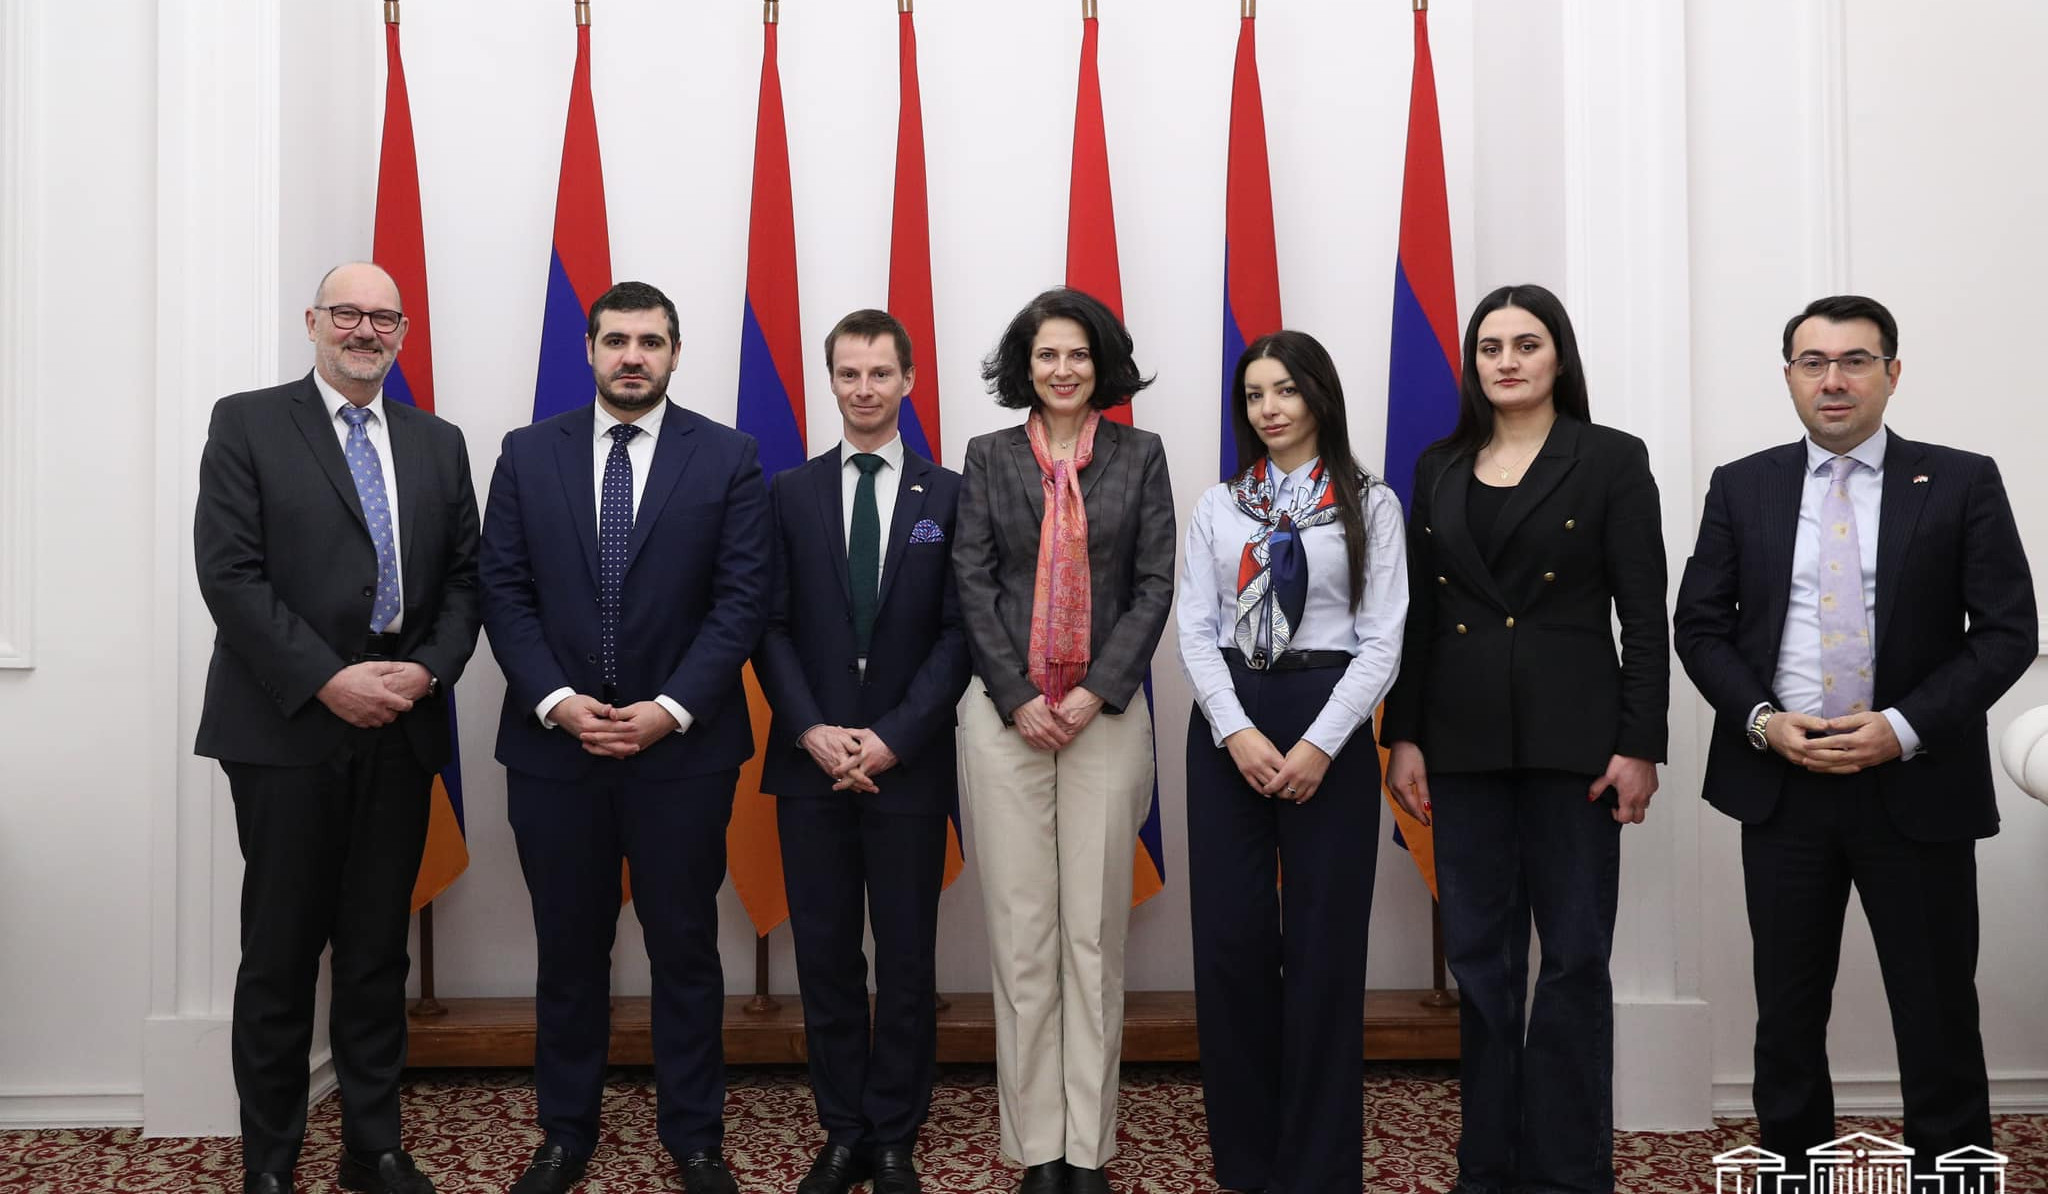 Luxembourg is a friendly country for Armenia: Arman Yeghoyan